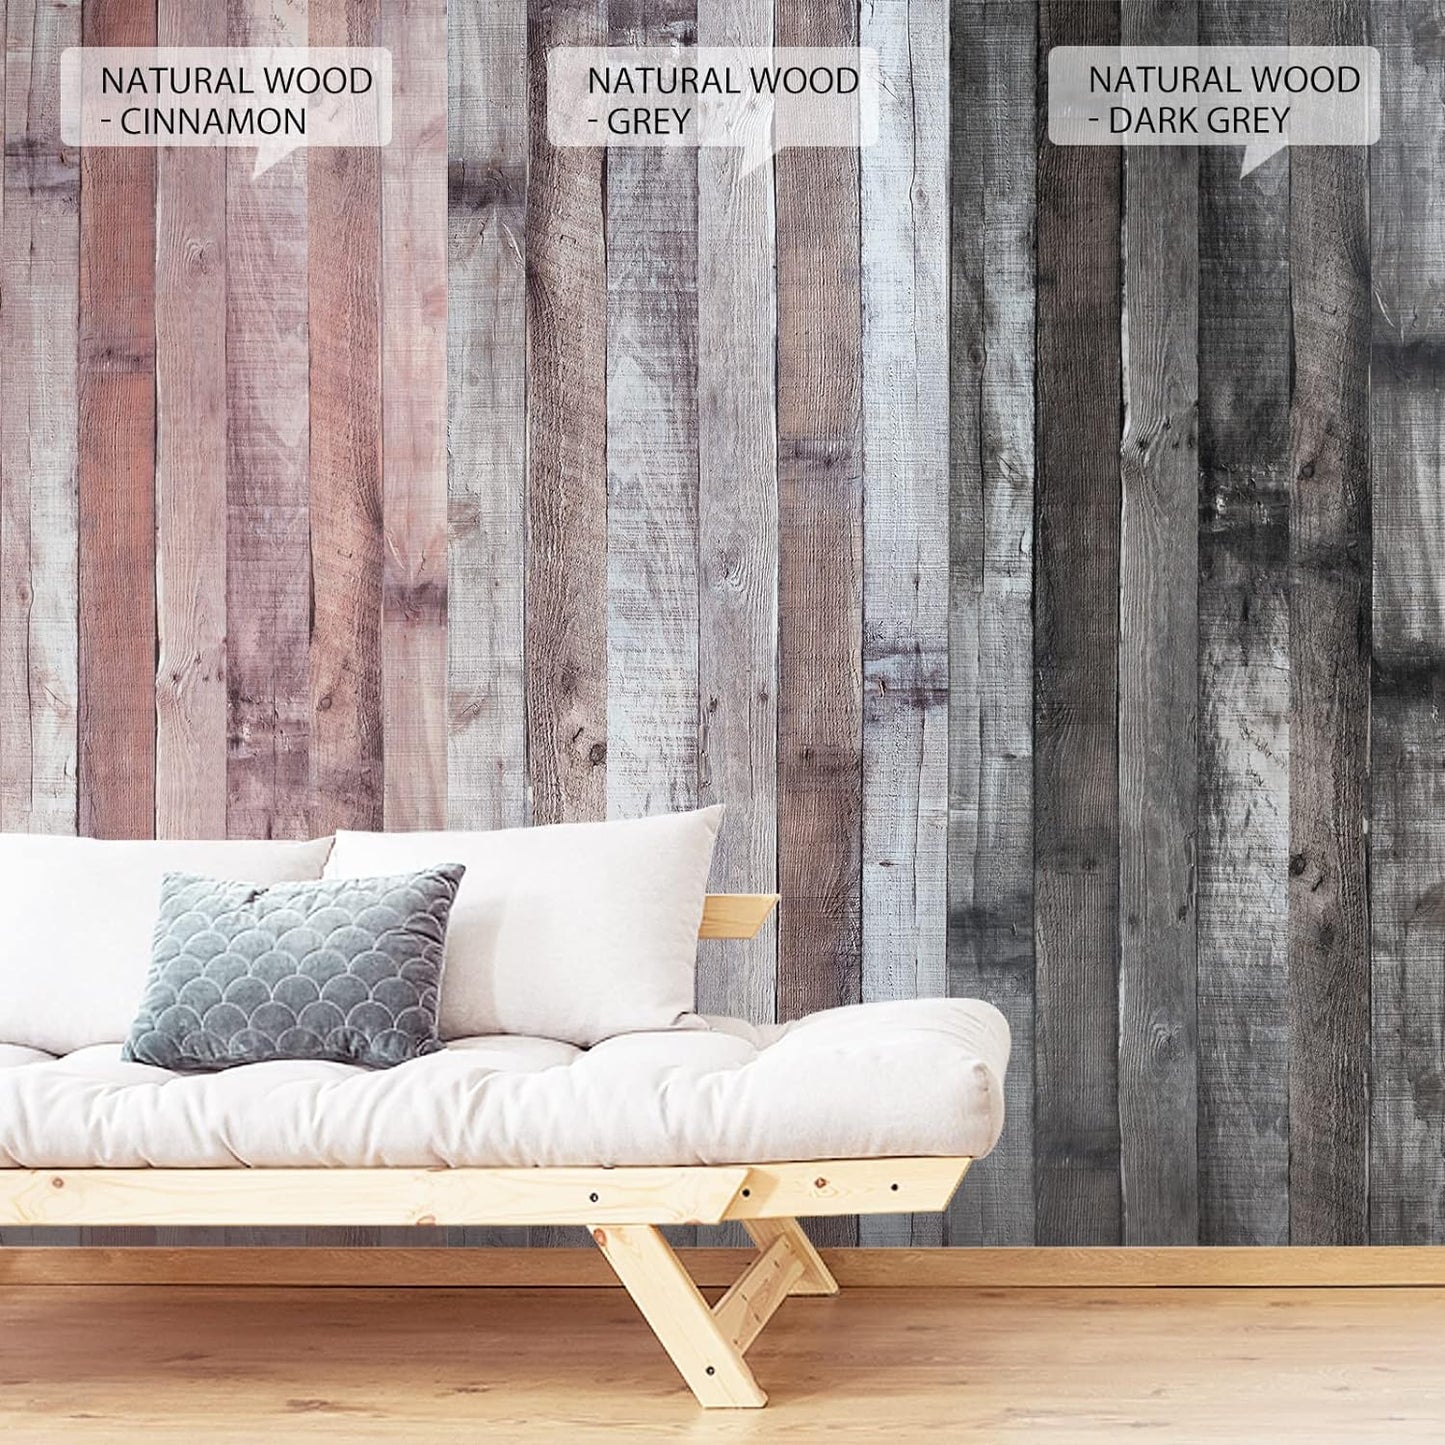 Yun-aeon Natural Wood-Grey Wood Contact Paper Peel and Stick Wallpaper 17.8”x 120”Self Adhesive Removable Vintage Faux Wood Wall Paper Plank Shelf Home Decoration Kitchen Counter Cover Use